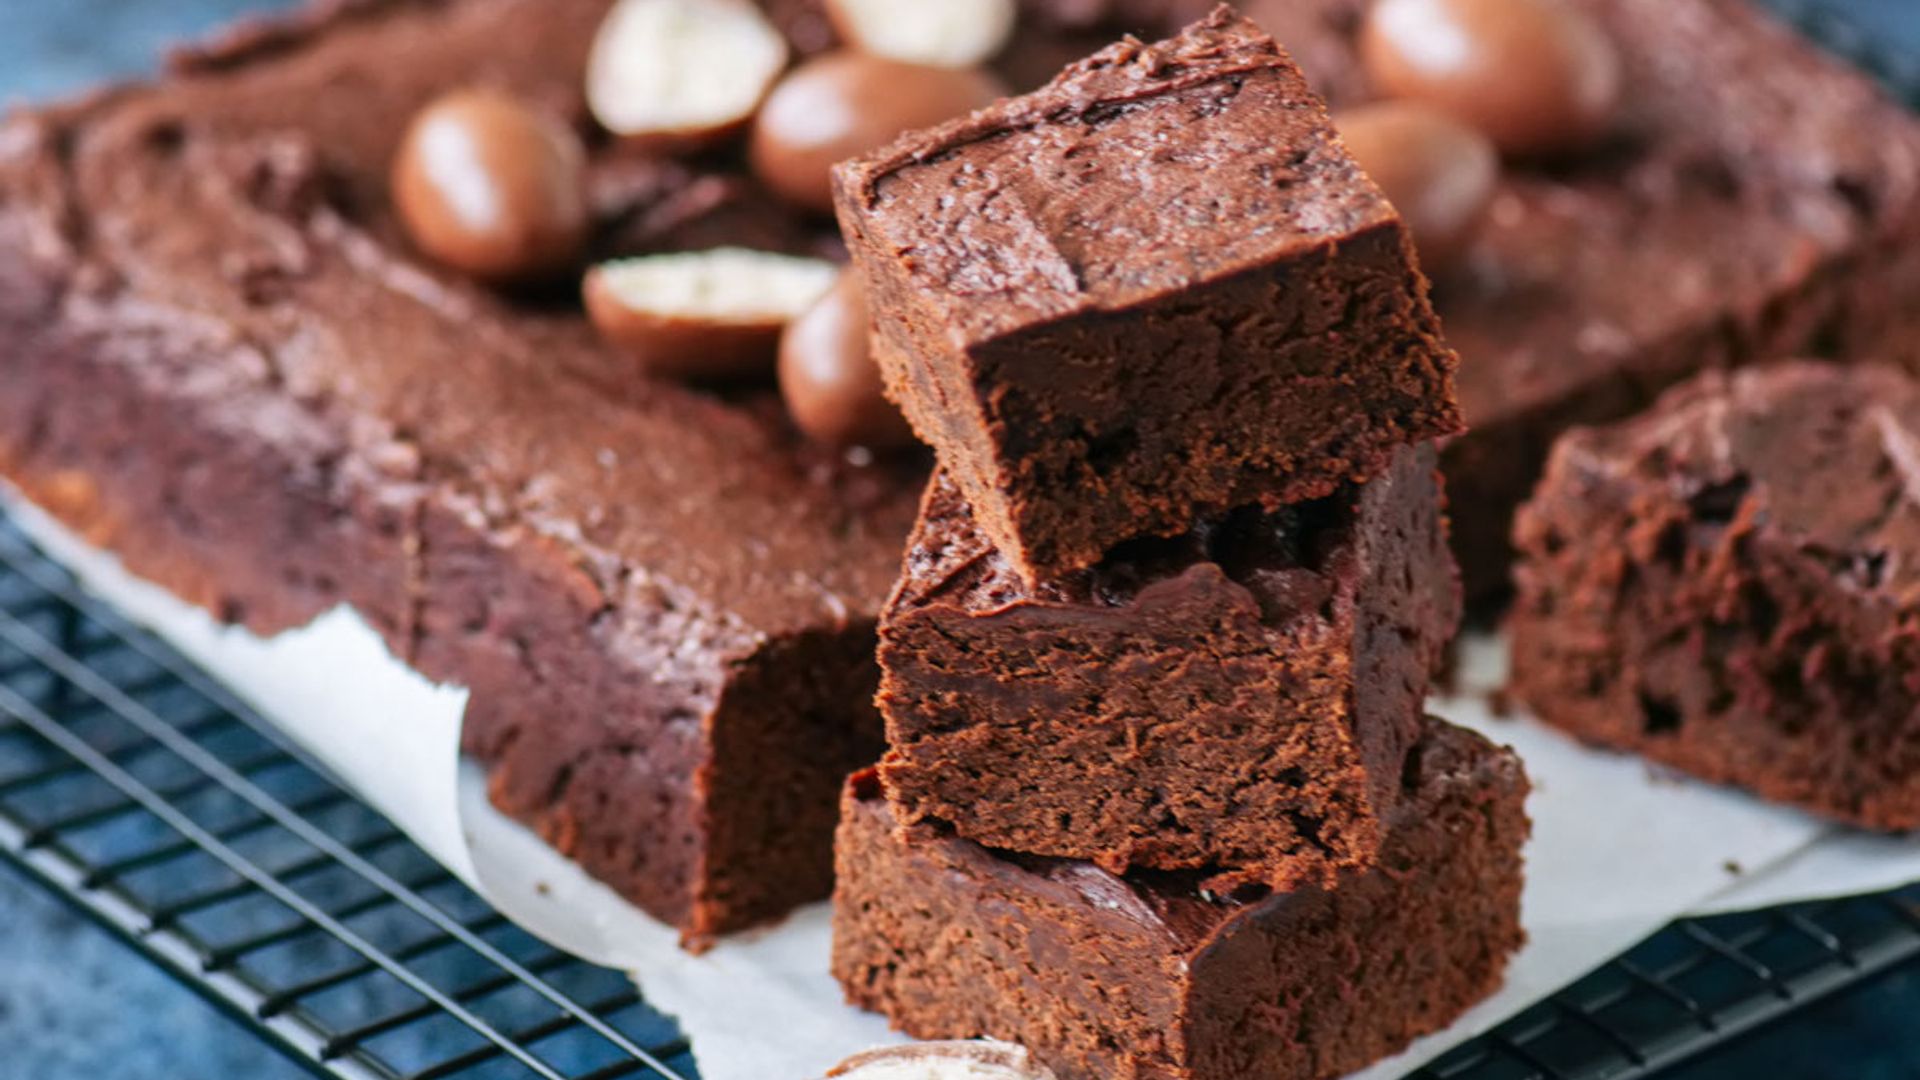 This Easter egg brownie recipe is a chocolate-lover's dream